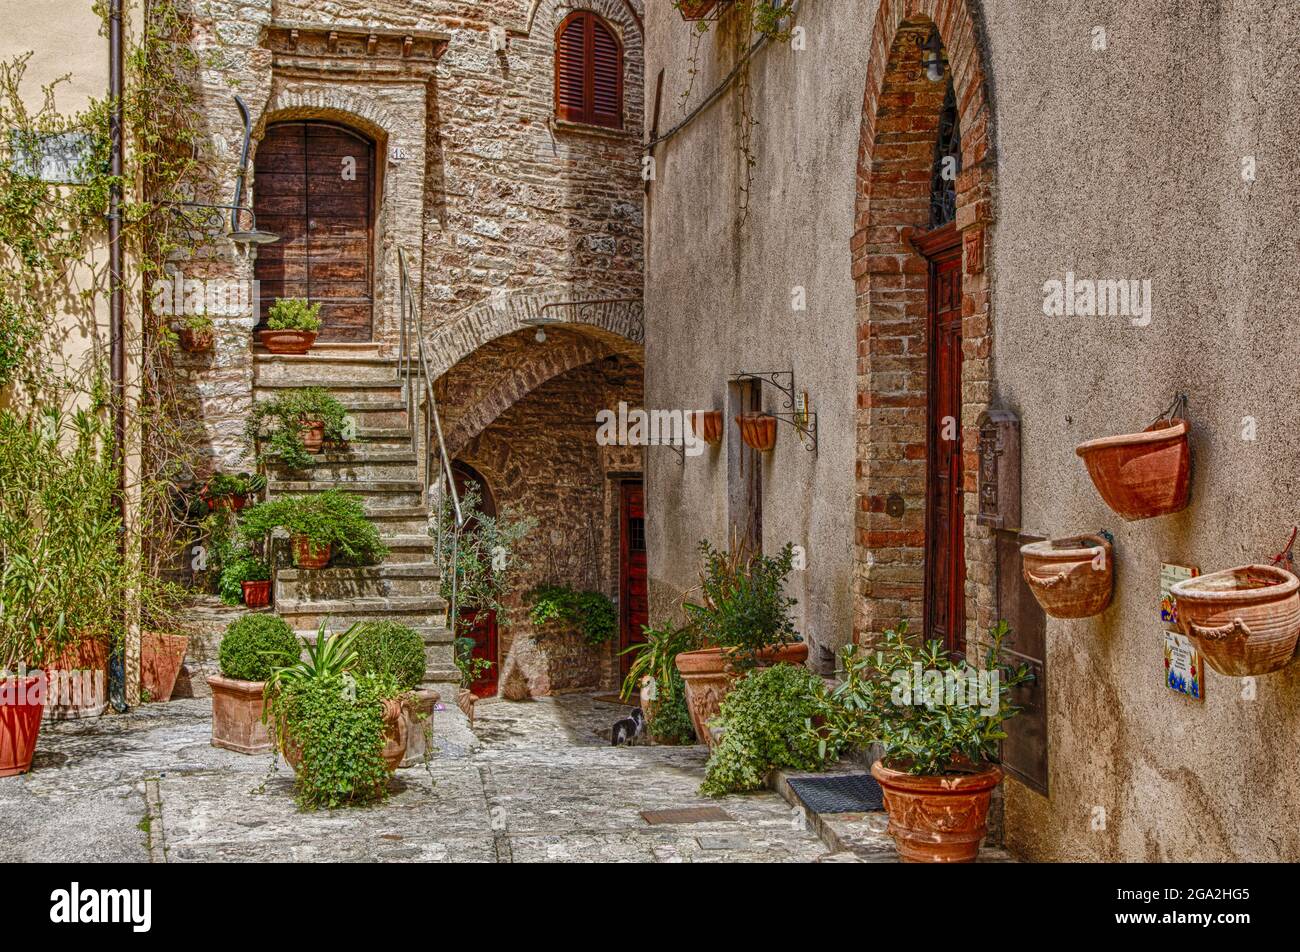 Exterior of an old, stone building with a staircase and three entrances to separate apartments with terracotta flower pots on the terrace as well a... Stock Photo